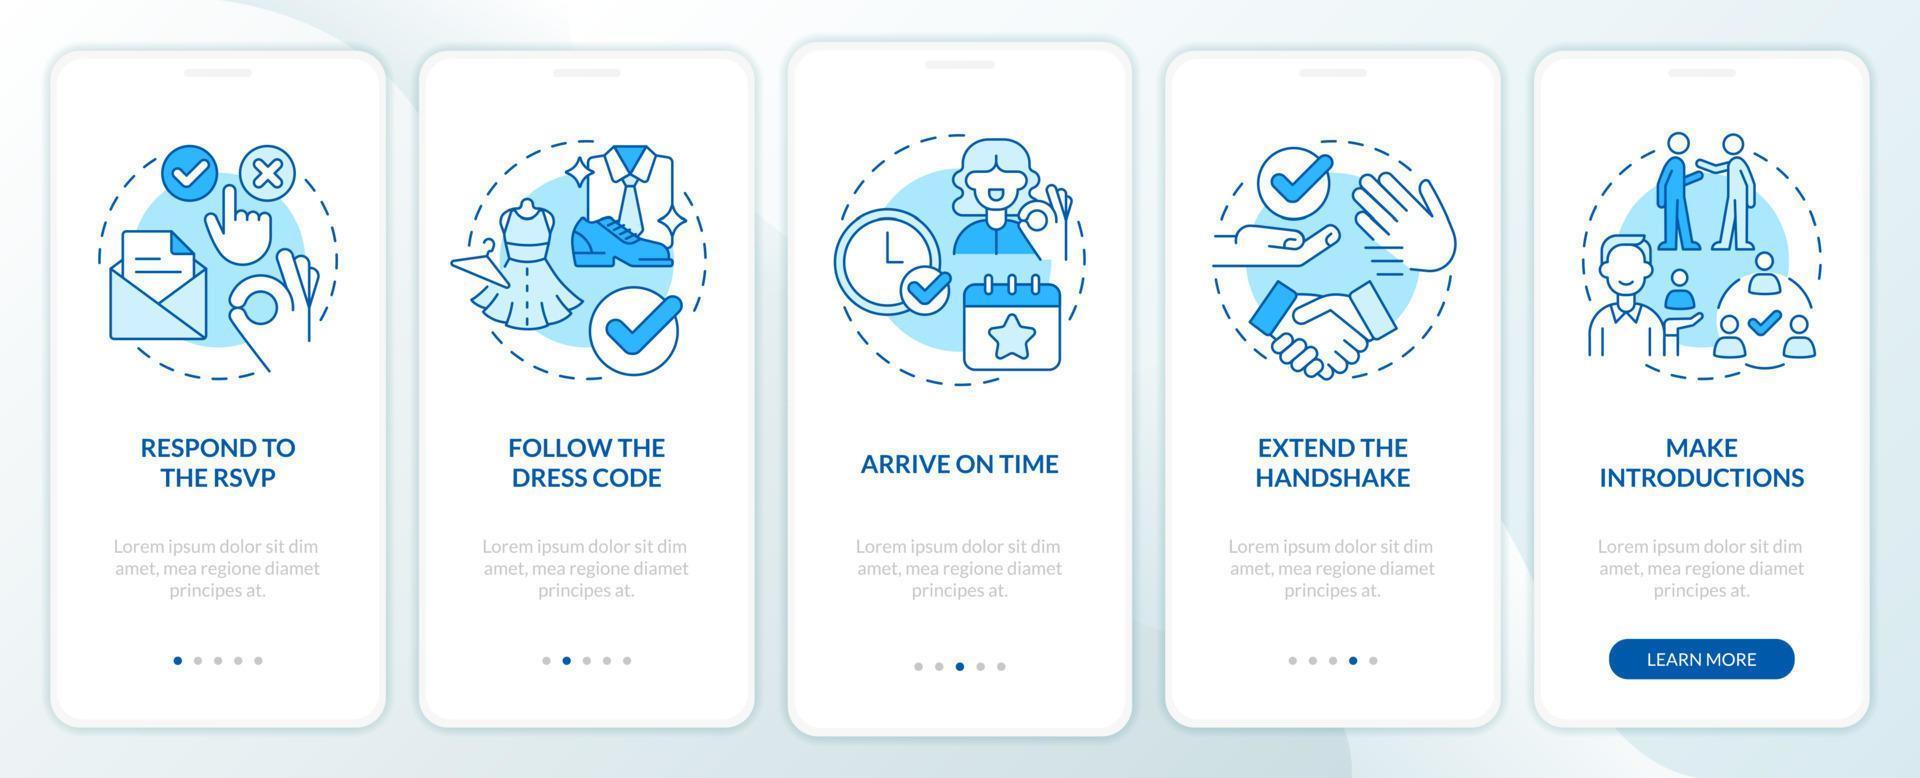 Business event etiquette rules blue onboarding mobile app screen vector